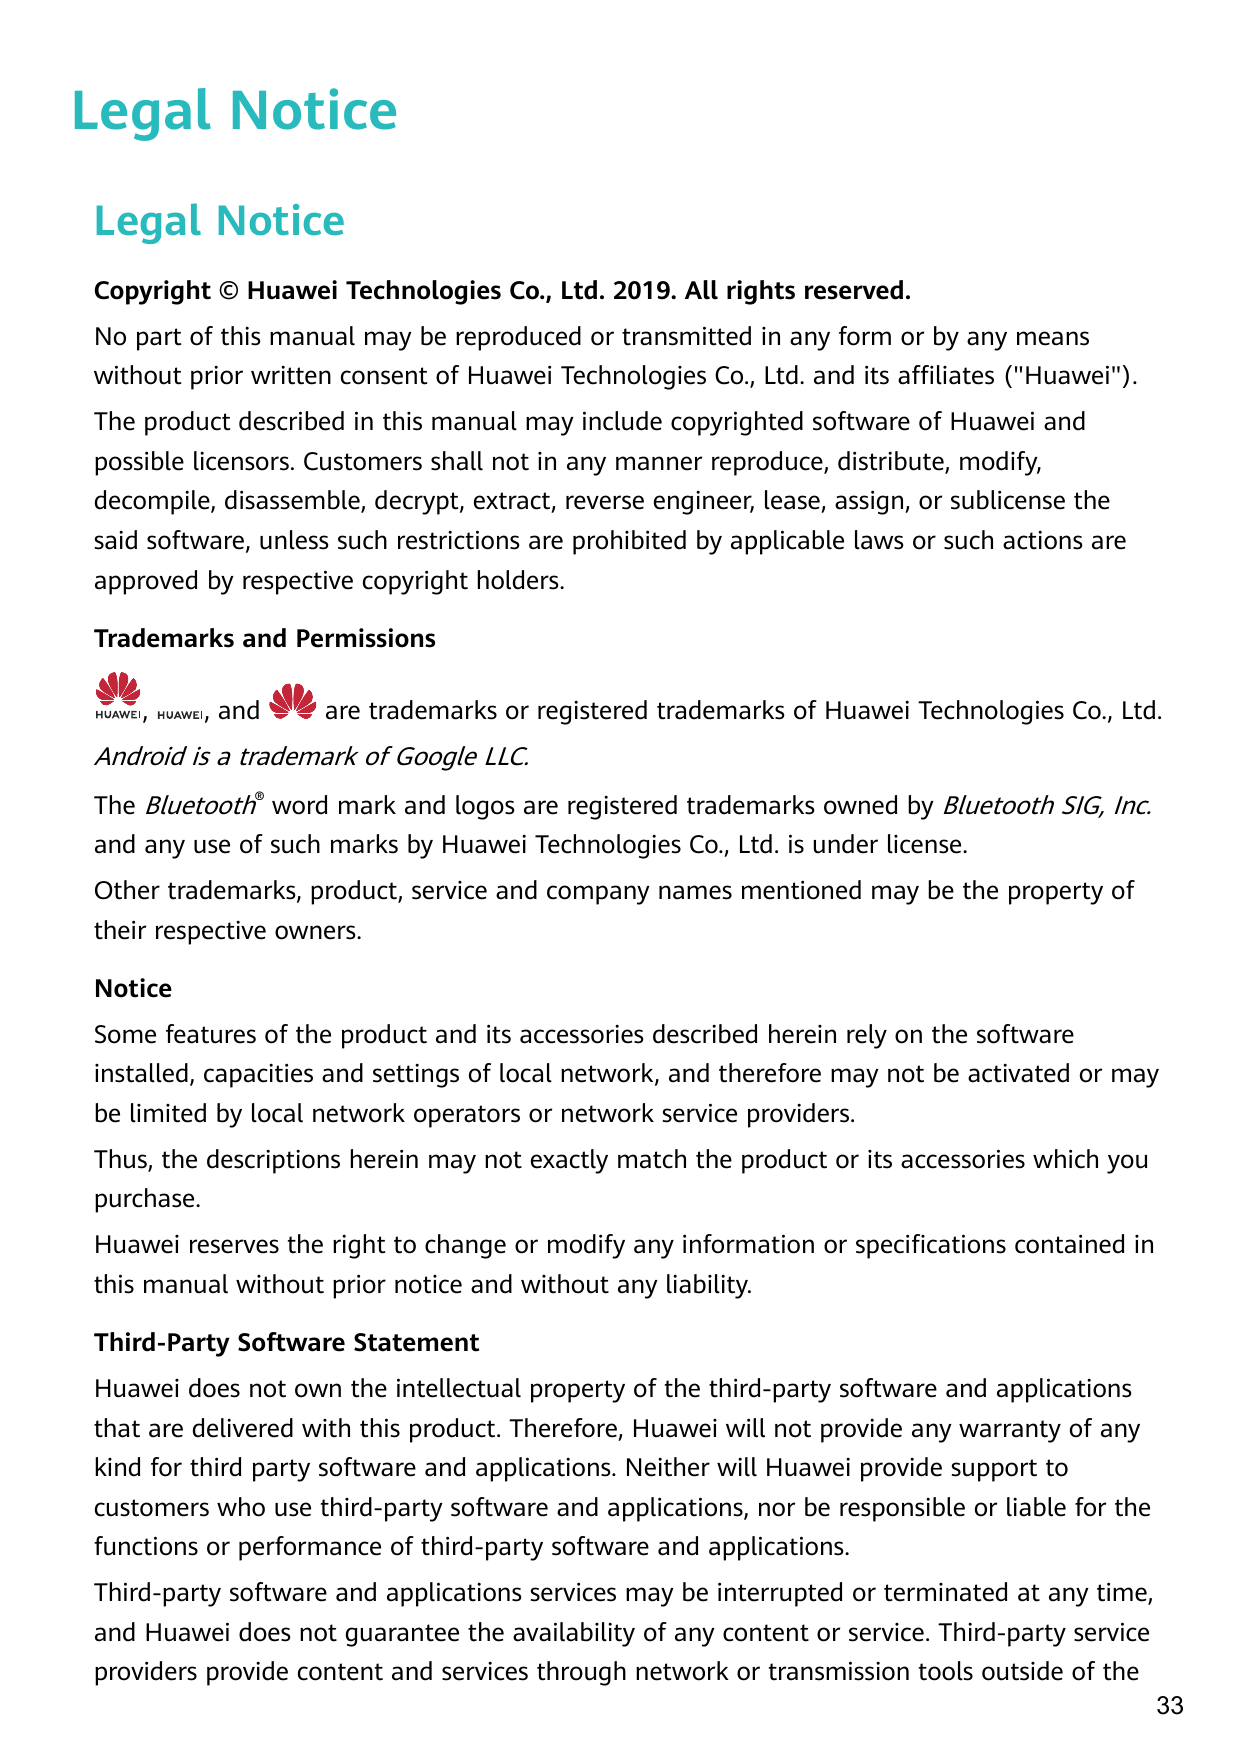 Legal NoticeLegal NoticeCopyright © Huawei Technologies Co., Ltd. 2019. All rights reserved.No part of this manual may be reprod